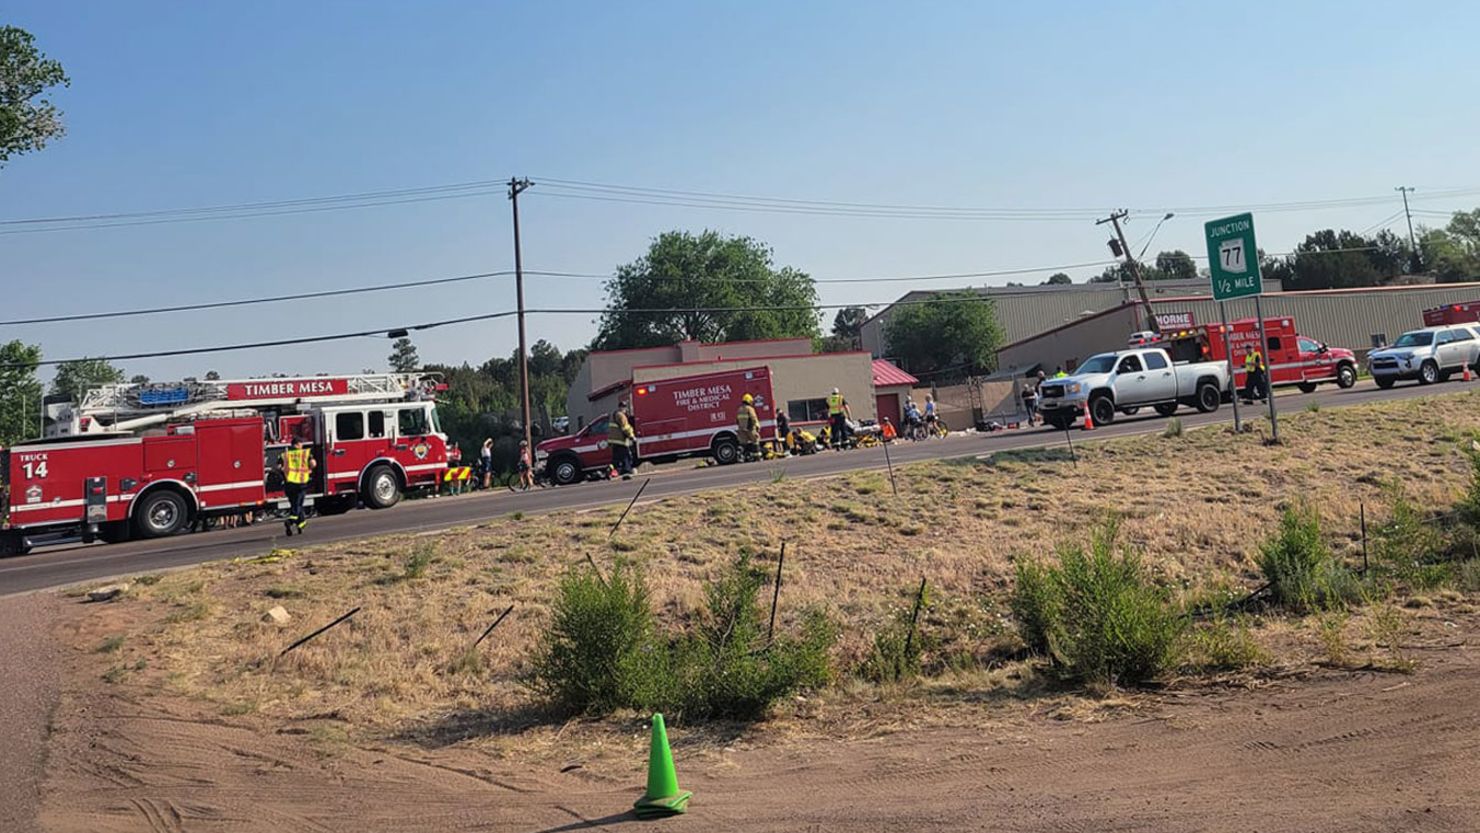 First responders attend the scene of an incident in Show Low, Arizona, where police say a suspect in a vehicle struck at least 9 cyclists on Saturday.